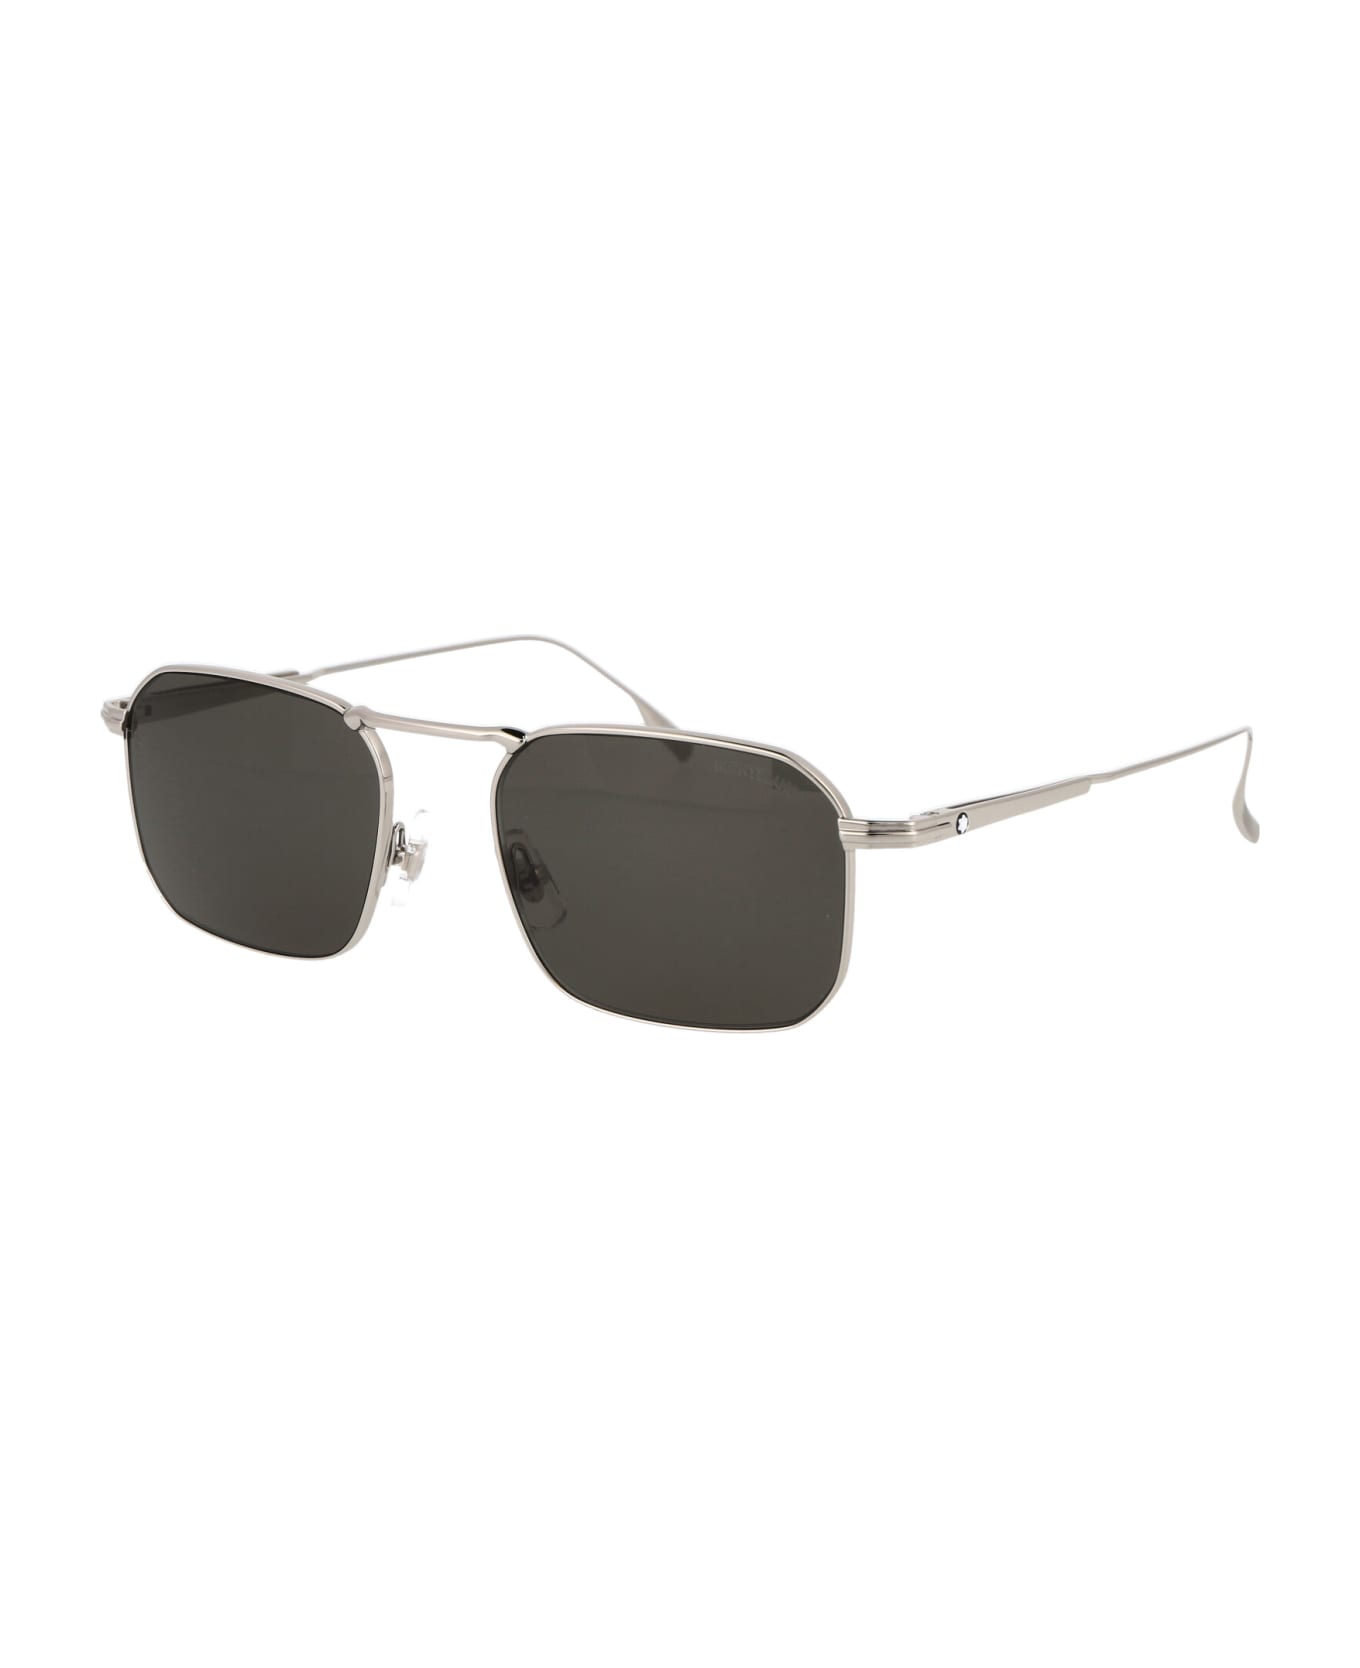 Montblanc Mb0218s Sunglasses - 001 SILVER SILVER GREY